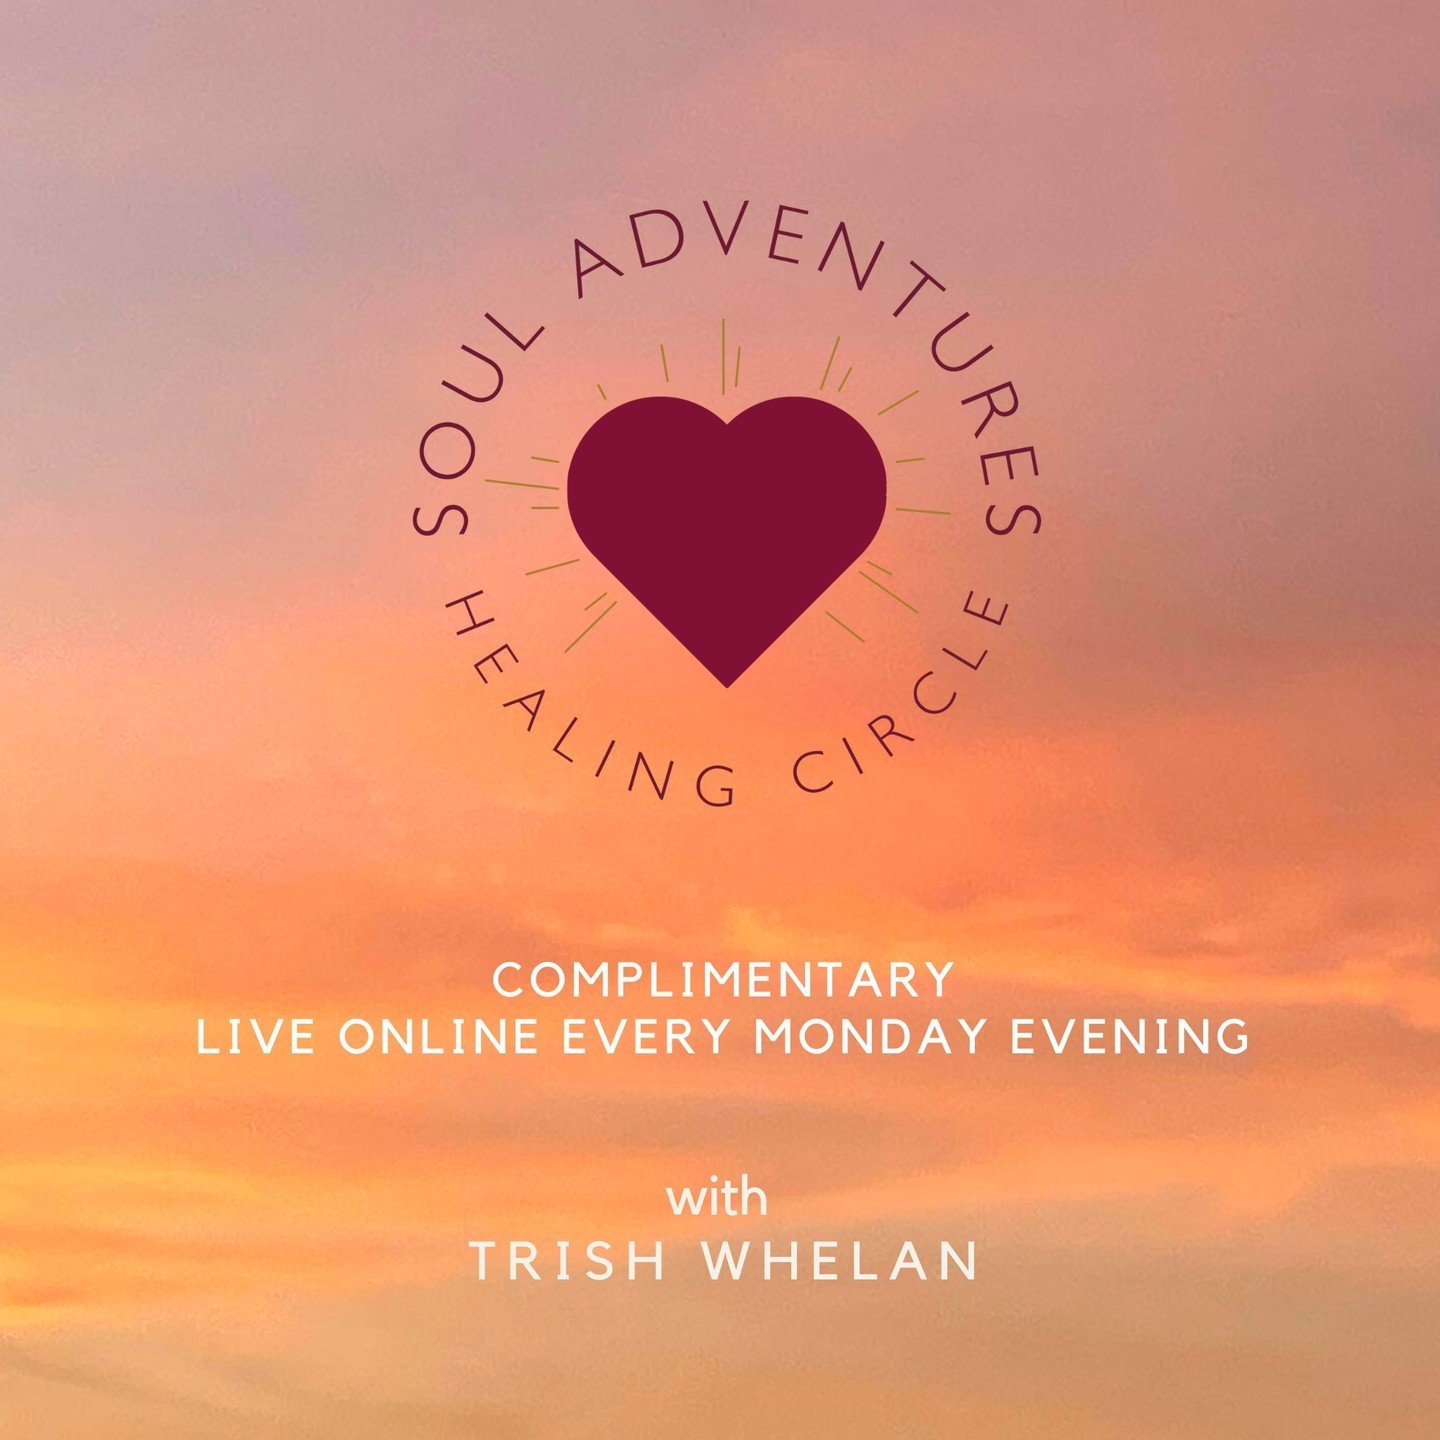 A return to healing 💗⁠ We will resume the live online free healing circles from Monday evening! 💗⁠
⁠
These sessions are a beautiful way to start the week &hellip; it's a wonderful coming together to offer up our prayers and is open to all⁠
⁠
It's a